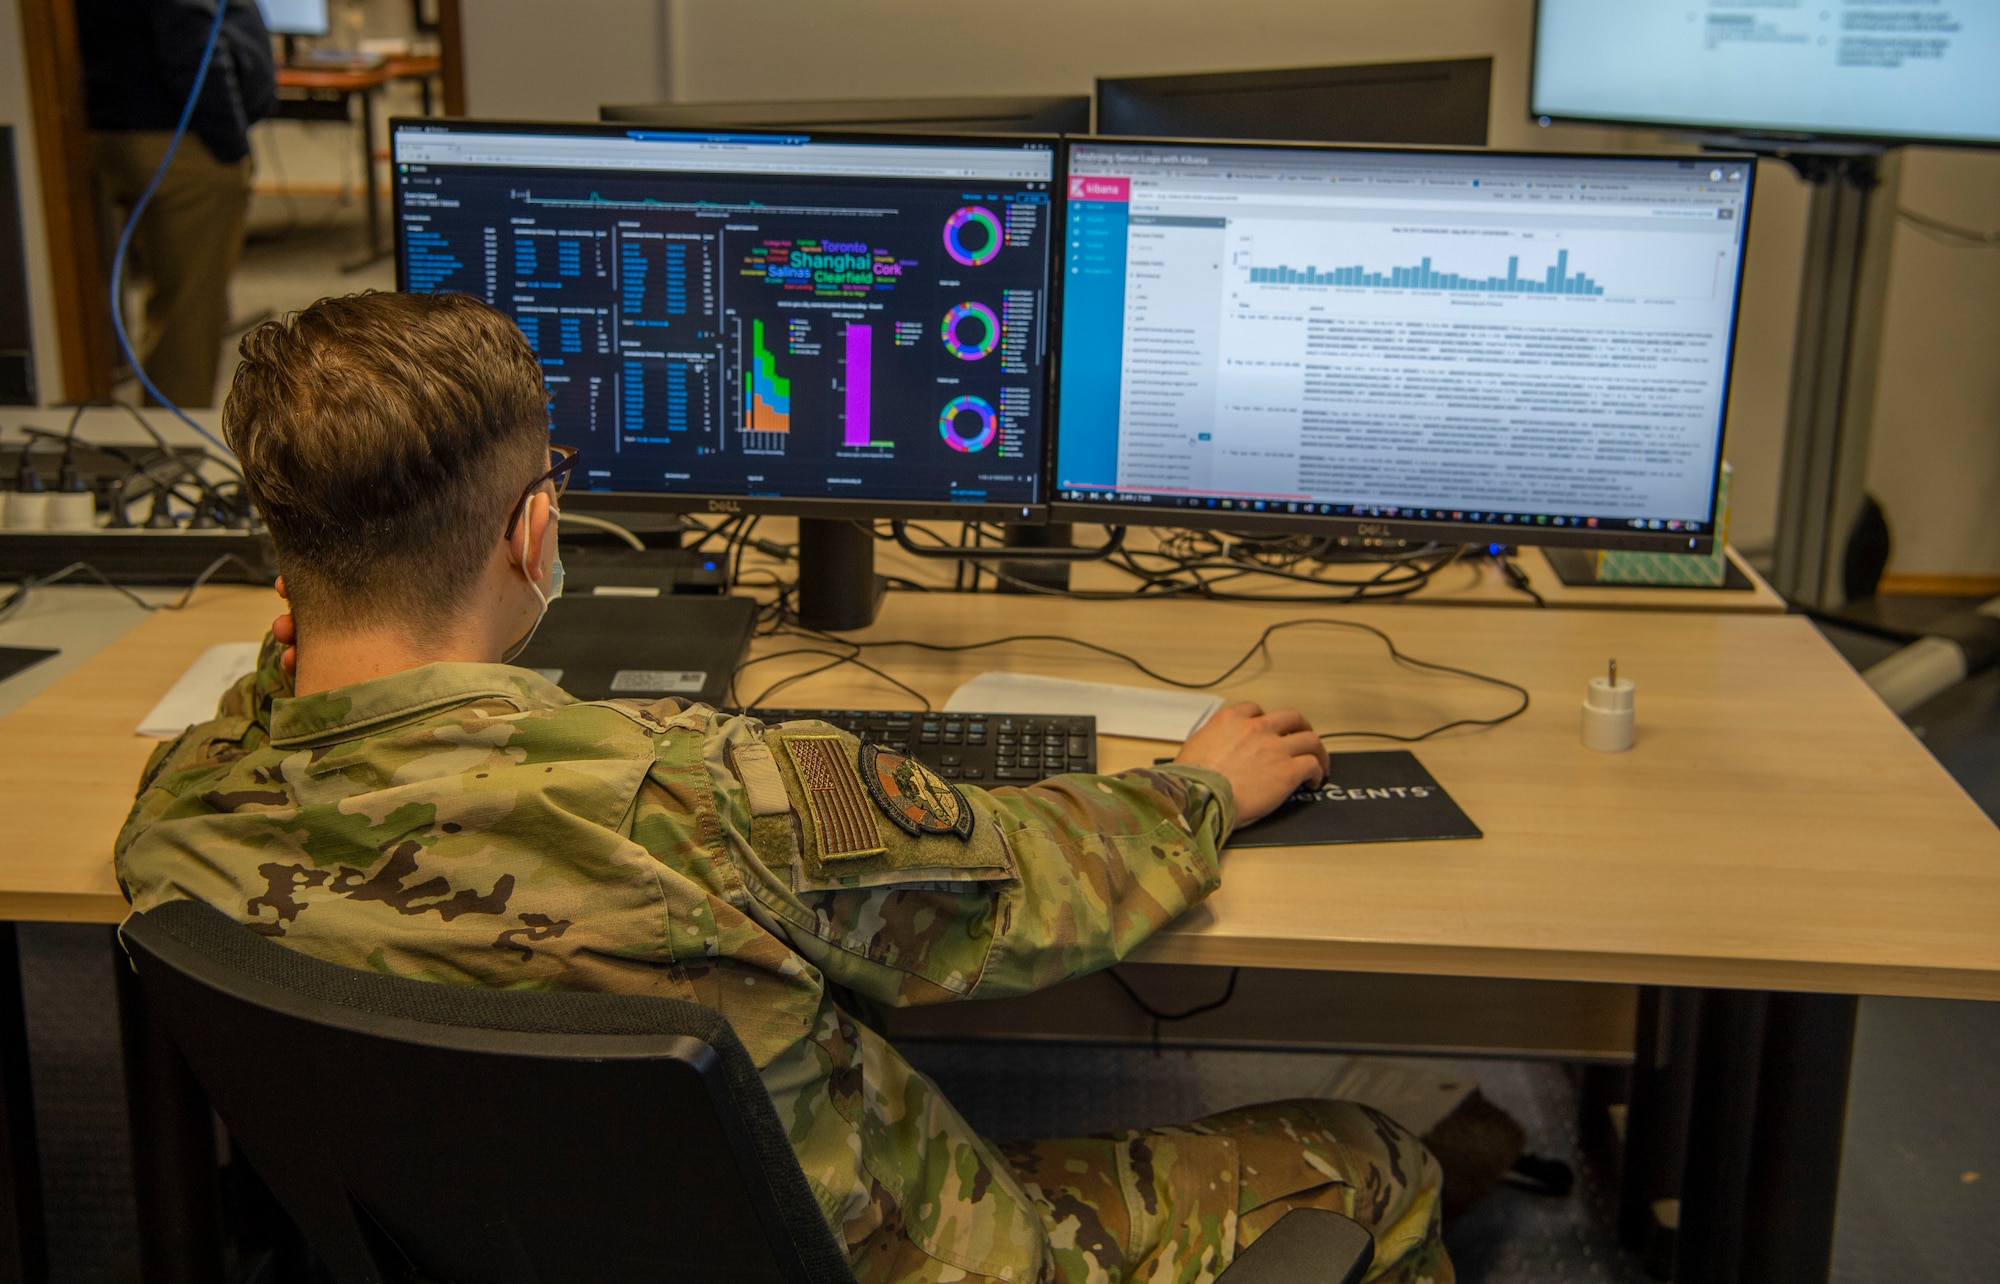 Staff Sgt. Andrew Romero, 422nd Communication Squadron, participates in the USAFE-led cyber exercise, Tacet Venari, at Ramstein Air Base, Germany, April 22, 2021. Tacet Venari is Latin for Silent Hunt, which describes the goal of the exercise: to hunt for adversaries within USAFE-AFAFRICA weapons systems. The exercise is one of several DoD-wide efforts to provide mission assurance and enhance command and control by providing warfighters the skills needed to deliver defensive cyber operations. (U.S. Air Force photo by 1st Lt. Hannah Durbin)